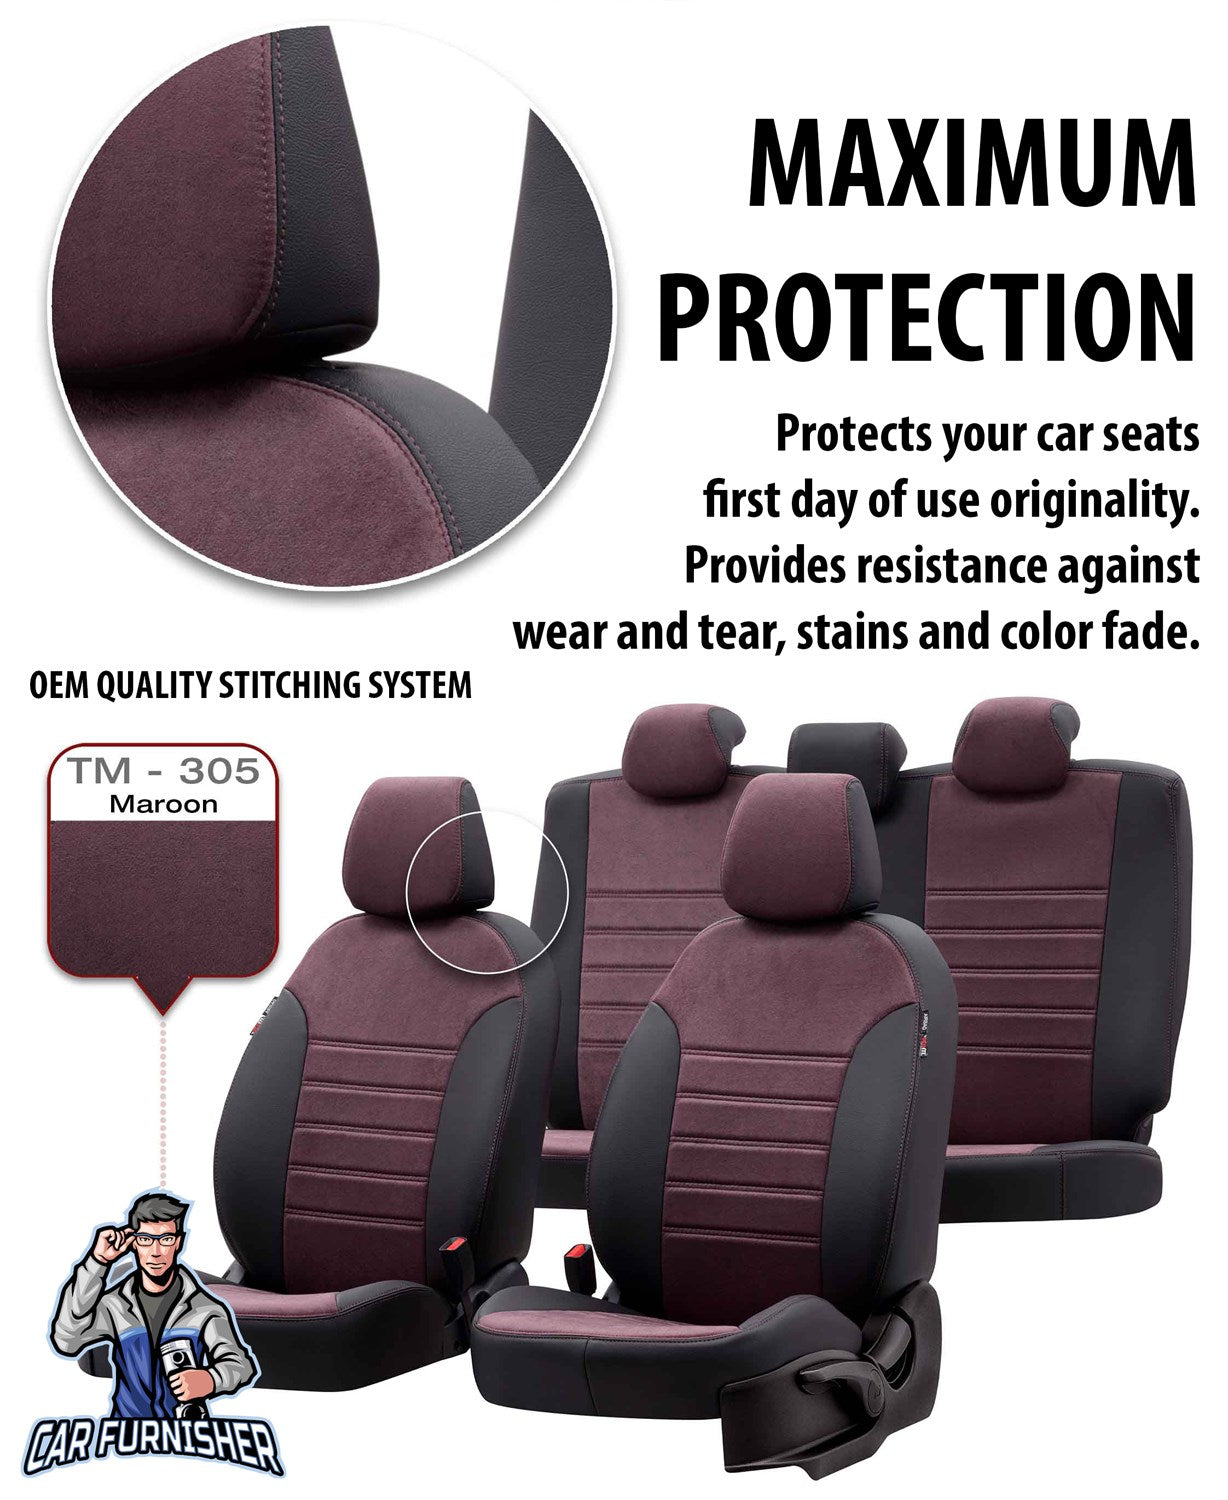 Peugeot Bipper Seat Covers Milano Suede Design Smoked Leather & Suede Fabric